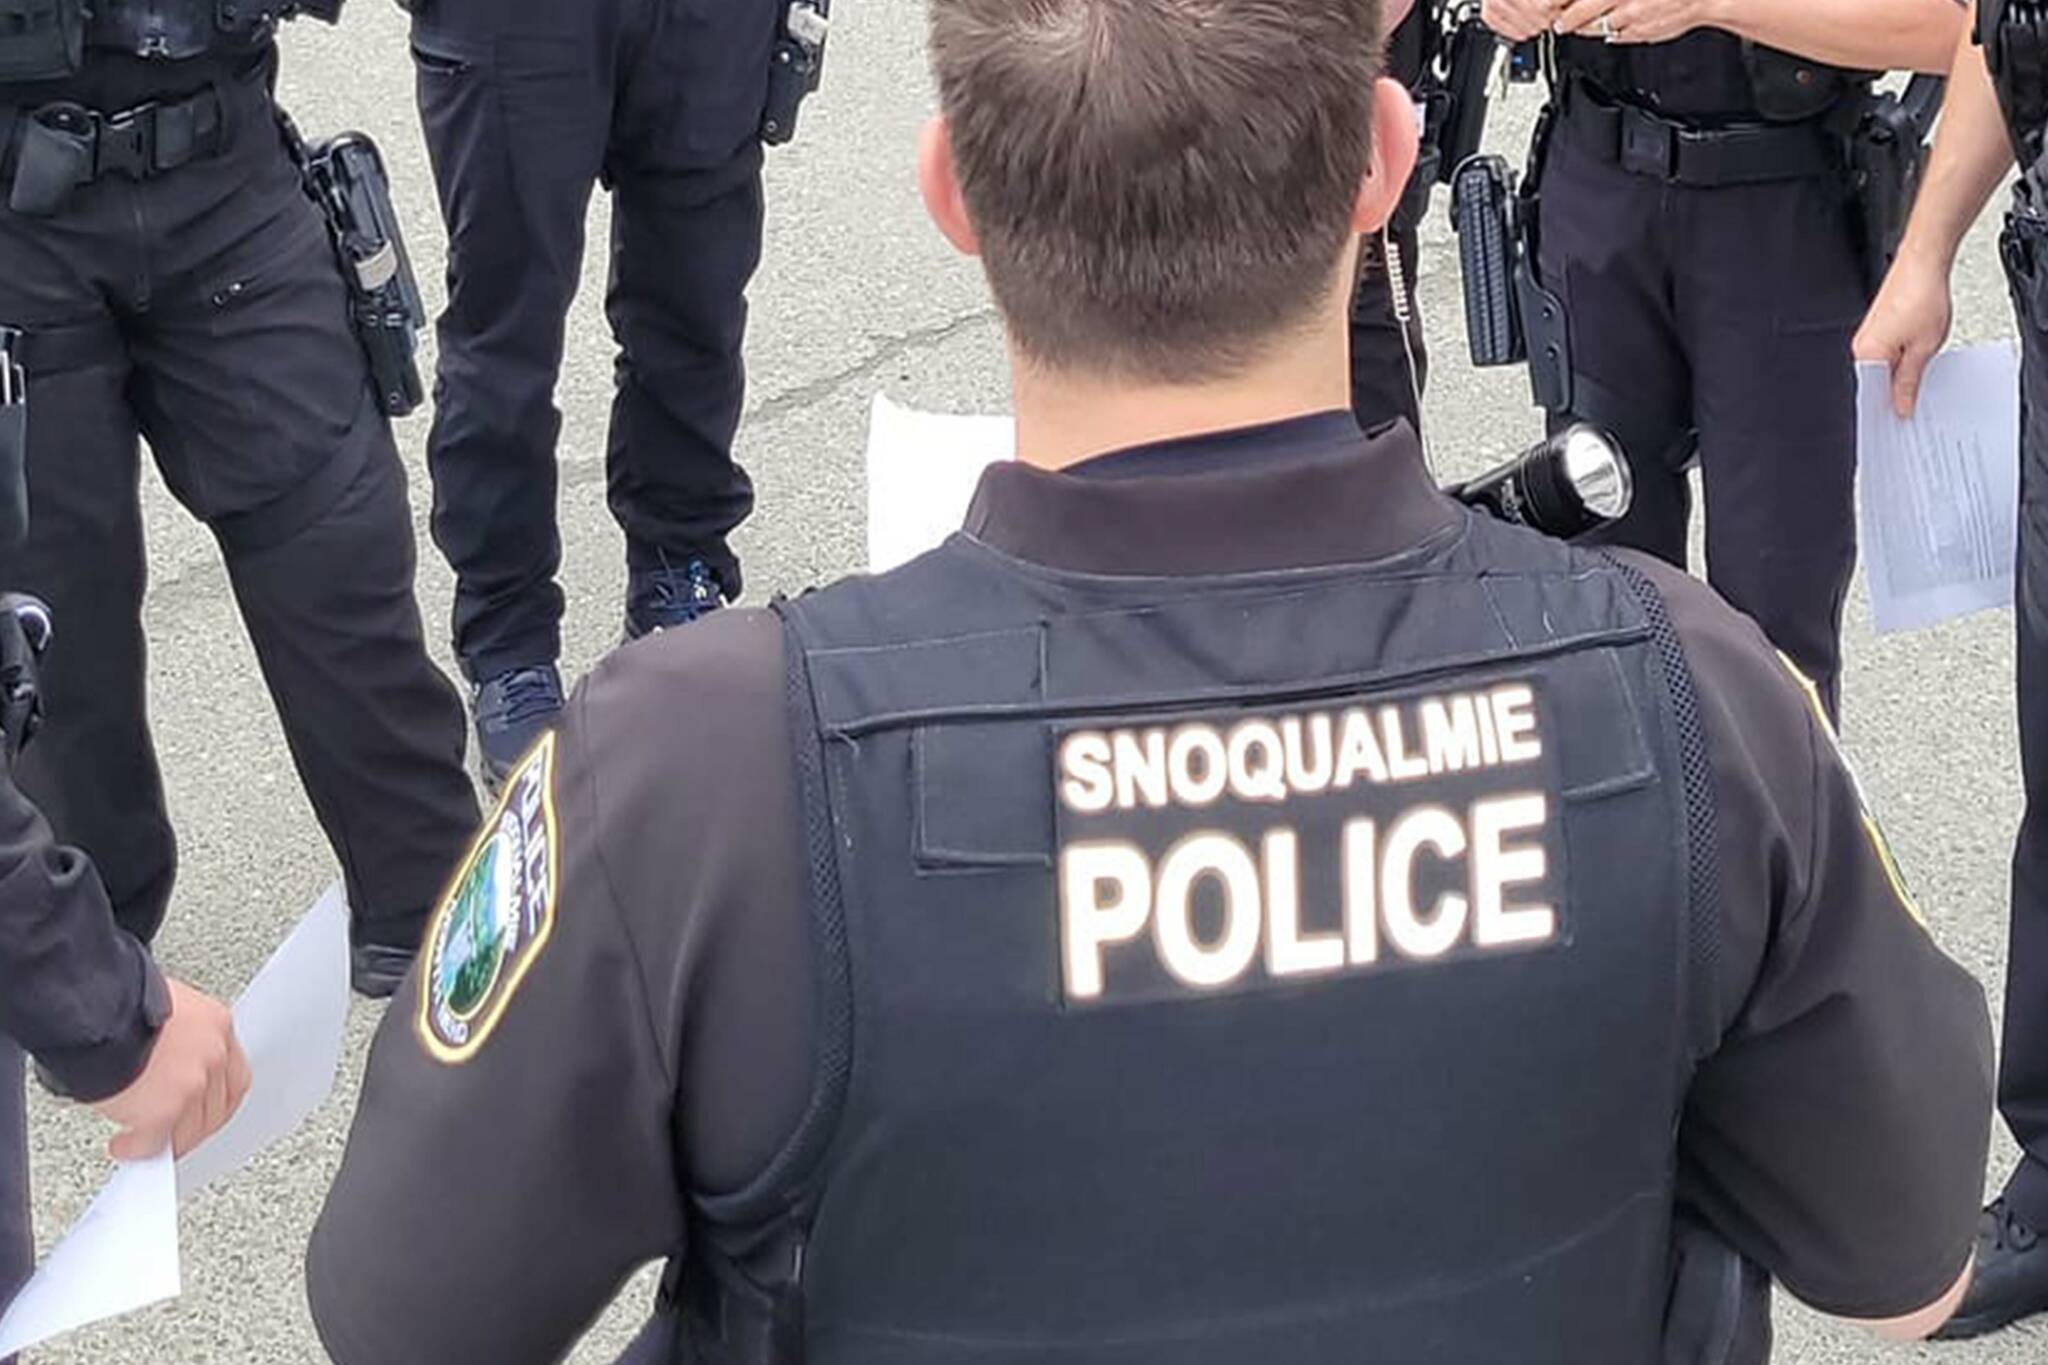 Snoqualmie Police officer. Courtesy photo.